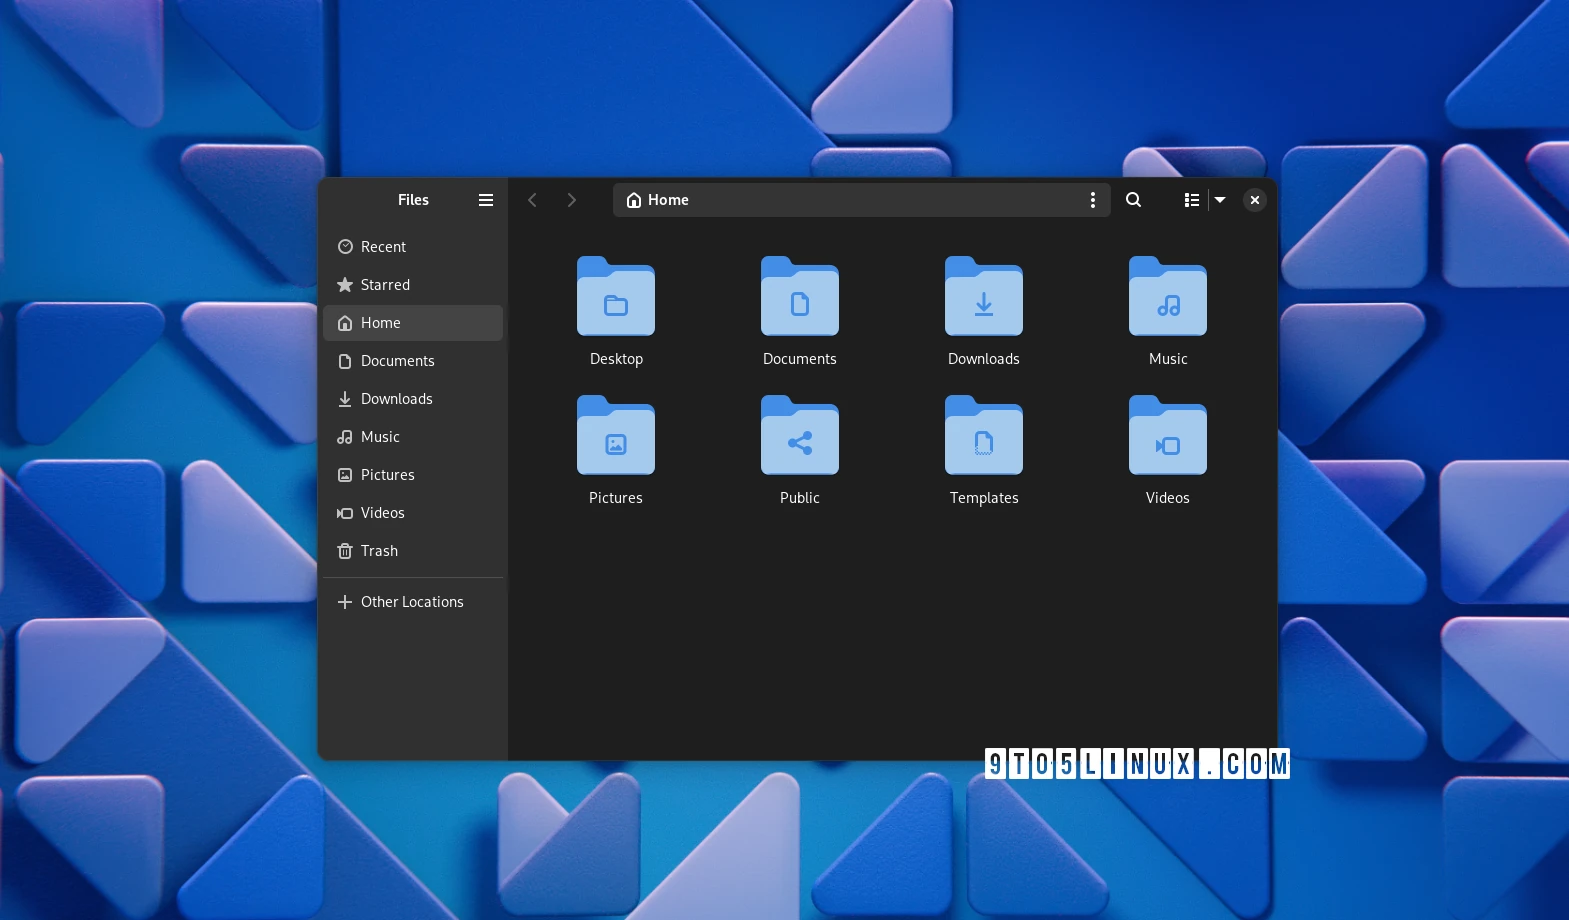 Nautilus File Manager Gets More Features Ahead of the GNOME 46 Release